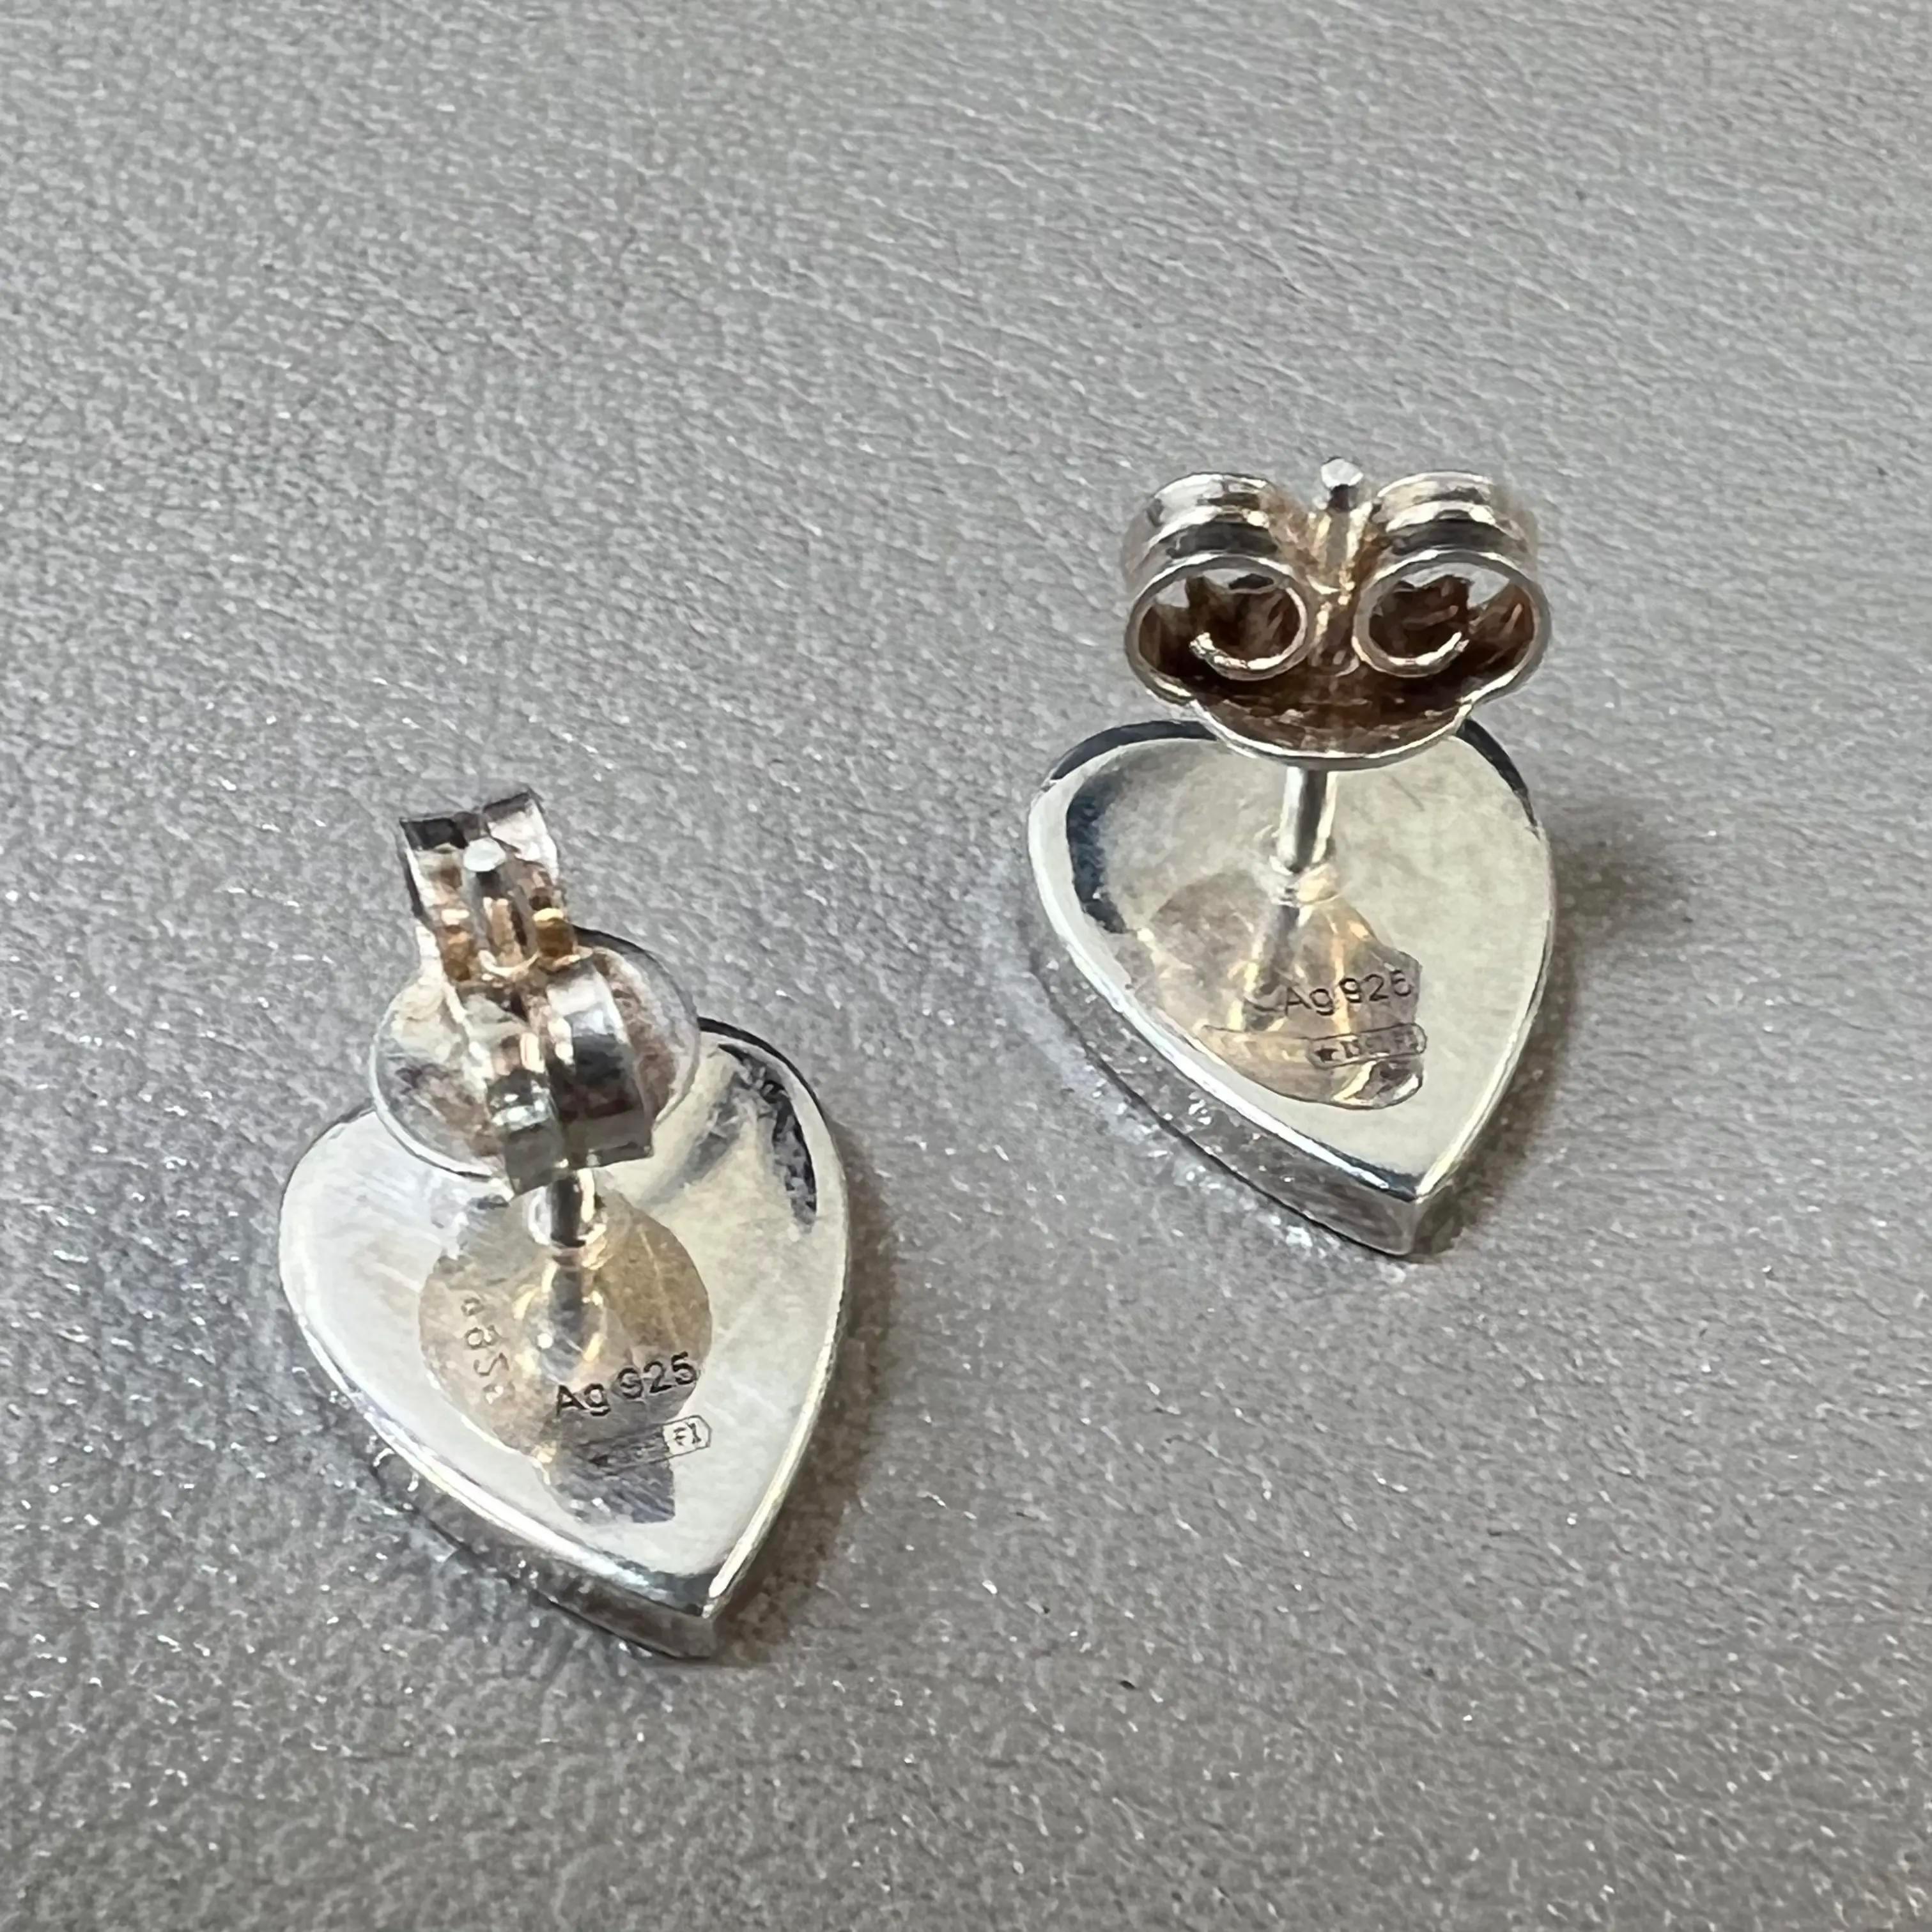 Beautiful GUCCI trademark heart shaped stud earrings. Crafted in 925 sterling silver. Earring size: 9.2mm x 11mm. Total weight: 3.32 grams. Push back closure. Great pre-owned condition. Will be polished before shipping. The original box and paper